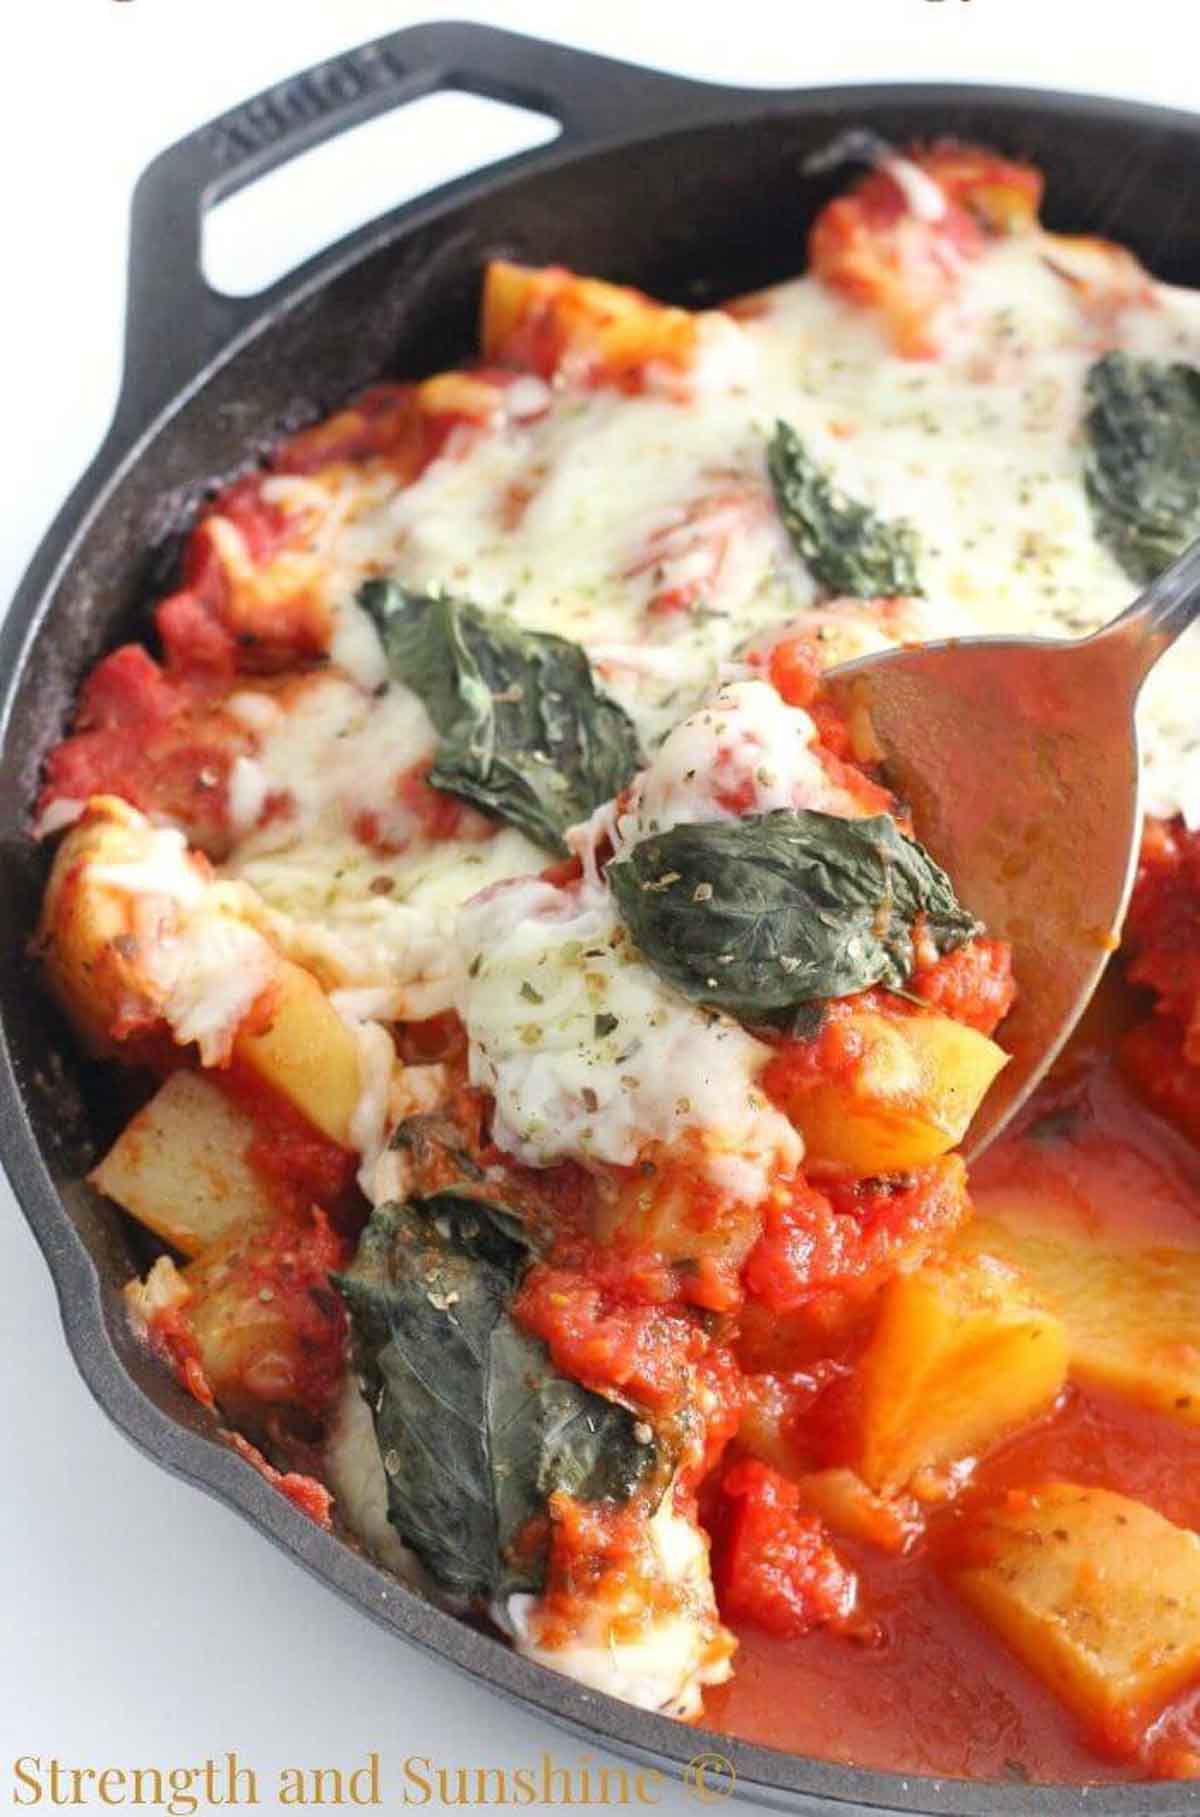 Potato casserole with cheese and tomato sauce topped with basil in a cast iron pan.